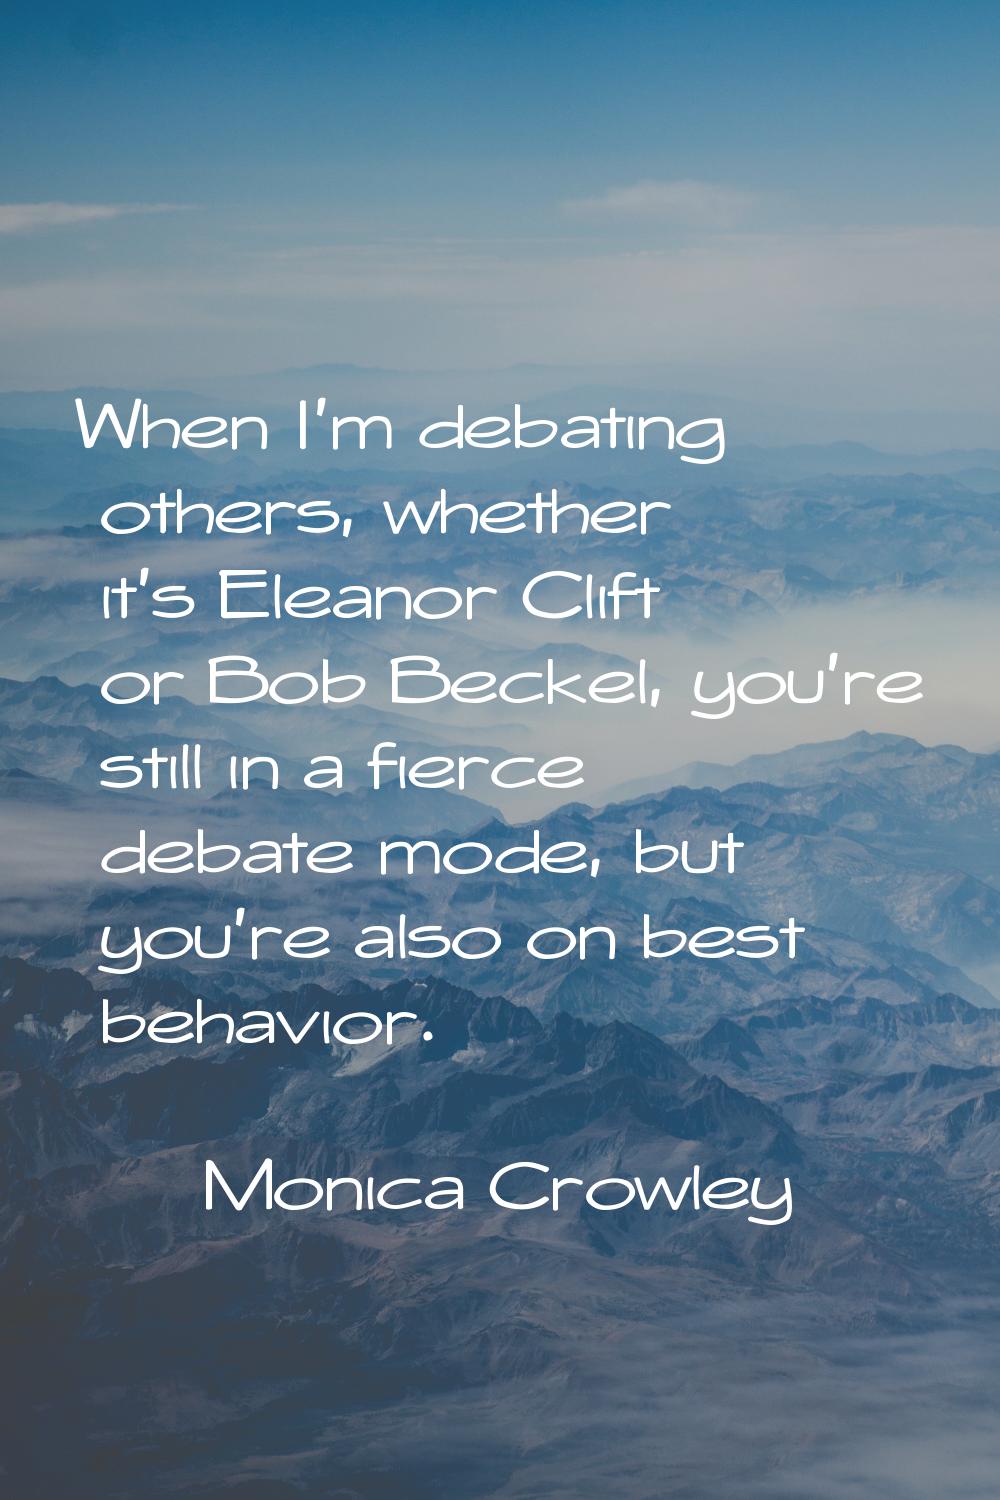 When I'm debating others, whether it's Eleanor Clift or Bob Beckel, you're still in a fierce debate